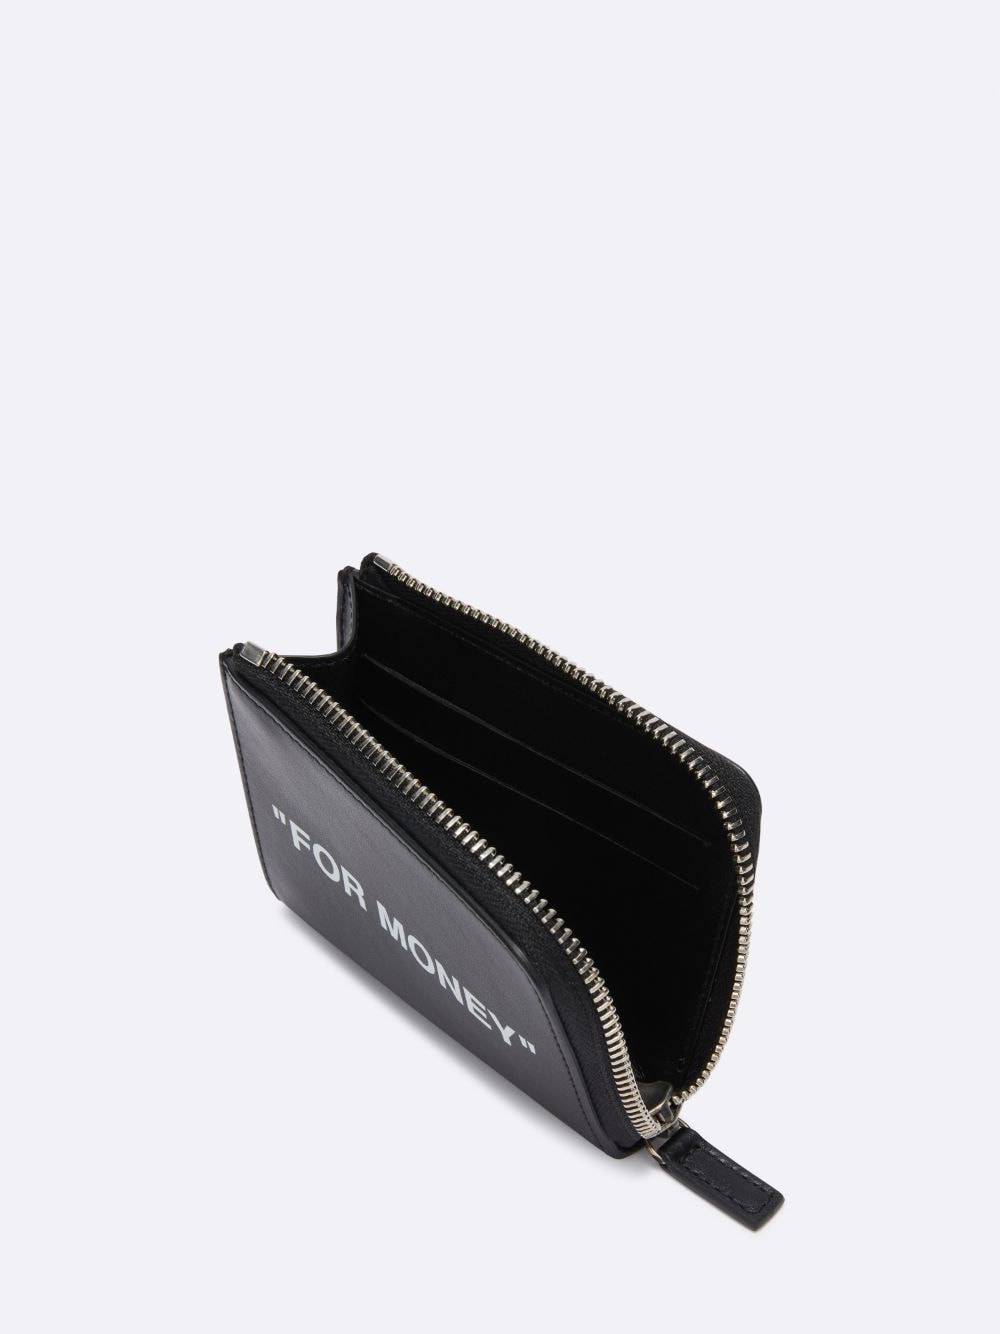 "FOR MONEY" CHAIN WALLET